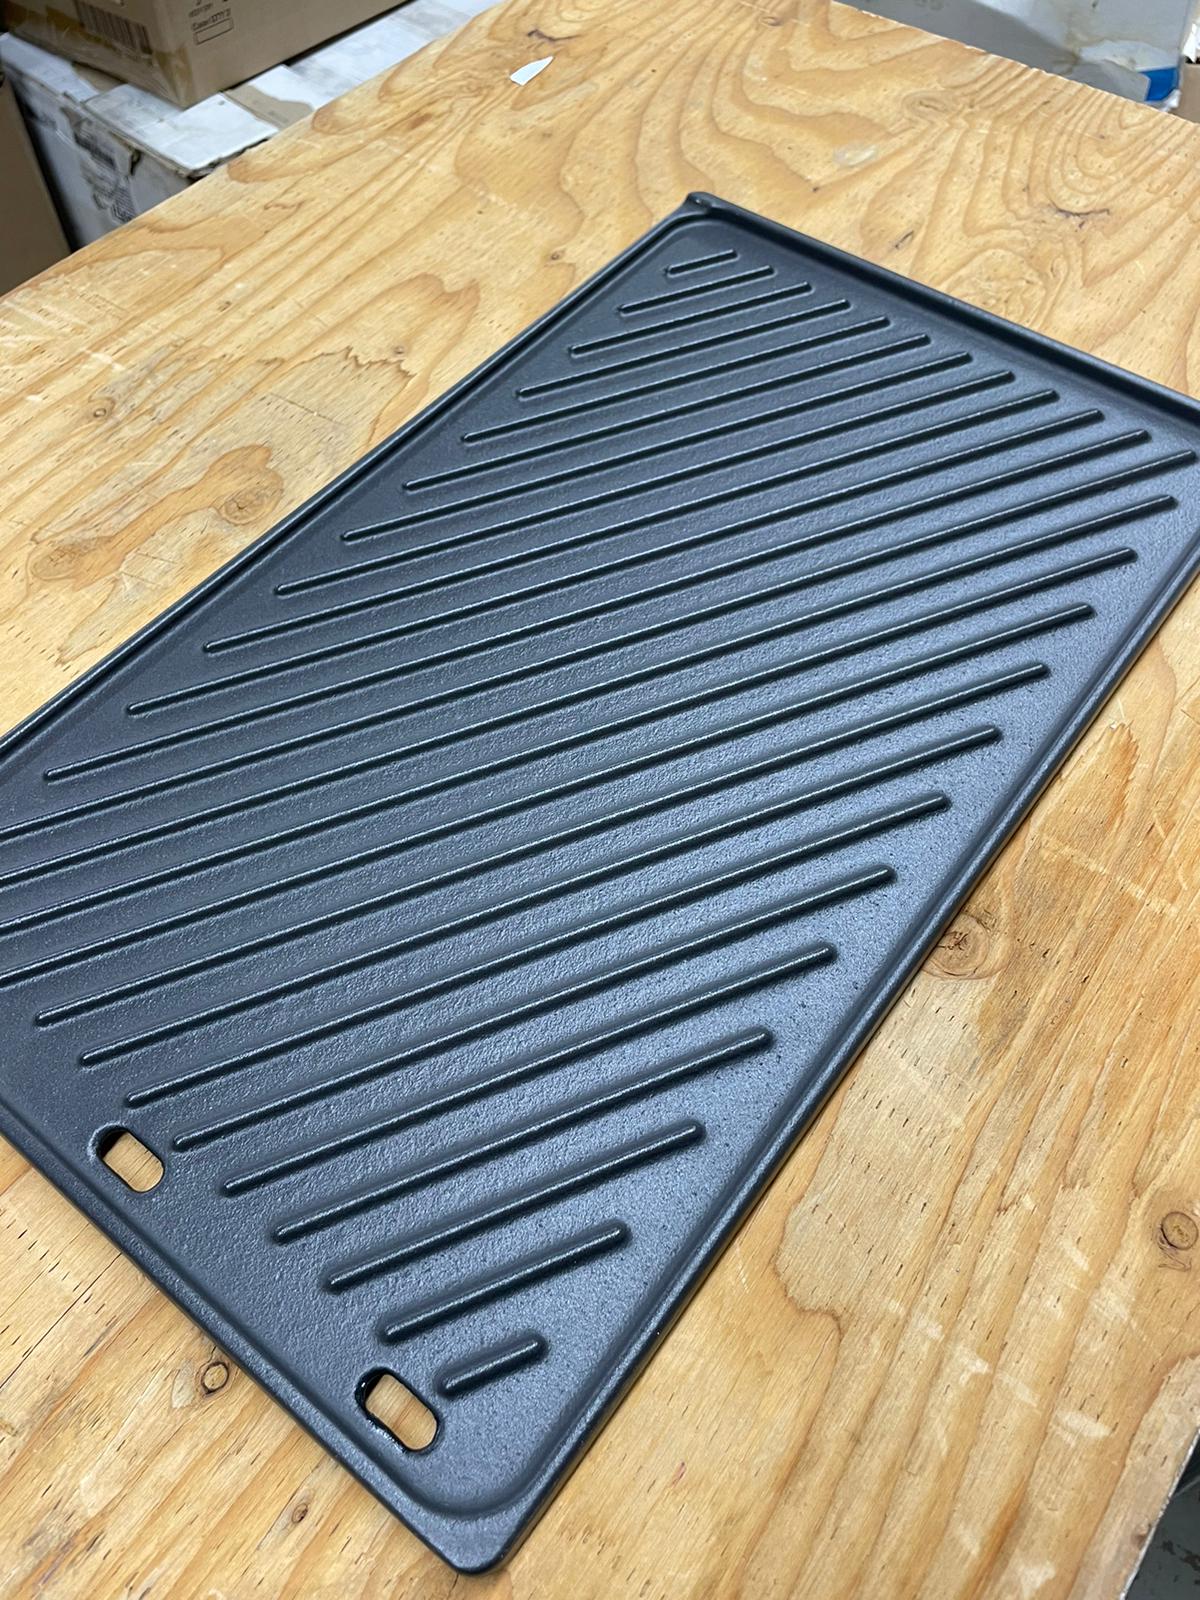 Onlyfire Reversible Cast Iron Cooking Griddle BBQ Griddle for Weber Genesis II/Genesis II LX 400 Series Gas Grills, Replacement Parts for Weber 66097